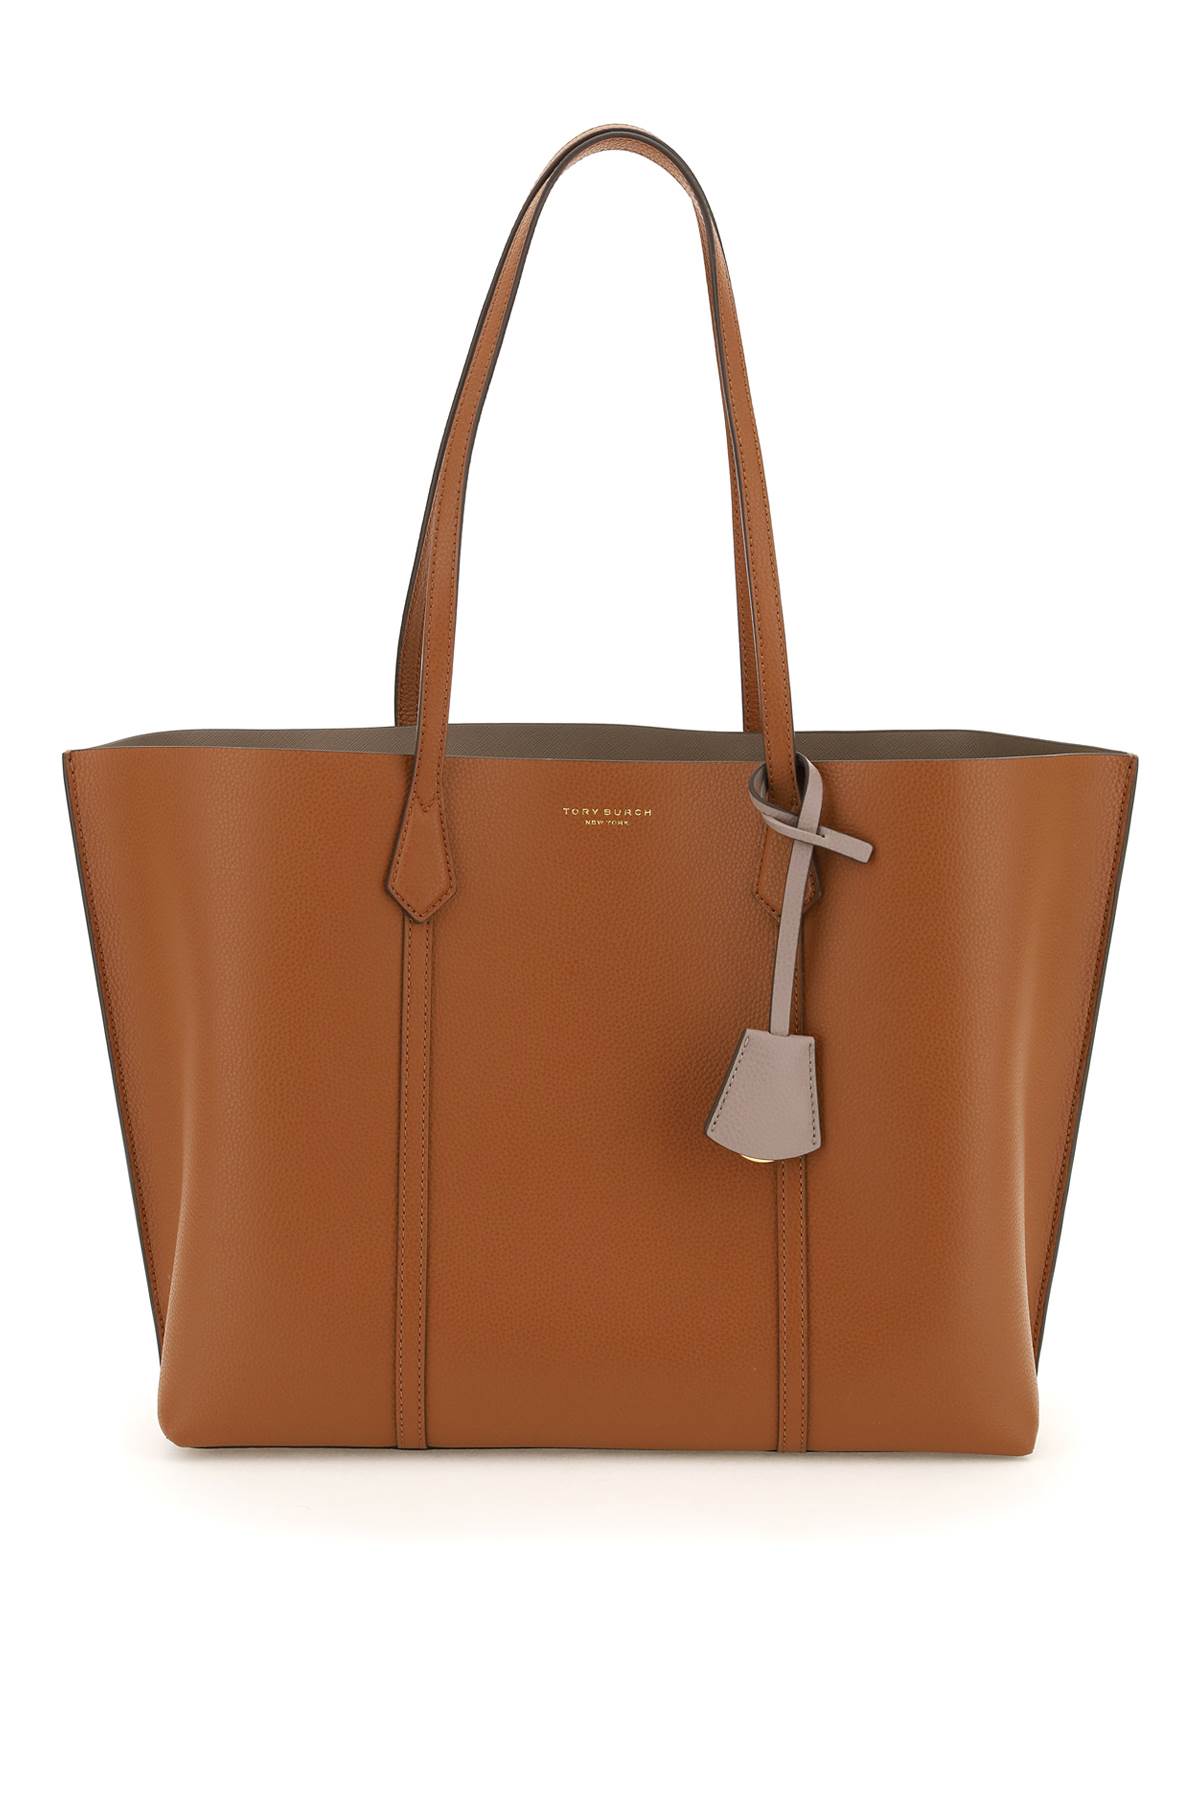 Shop Tory Burch Perry Shopping Bag In Light Umber (brown)